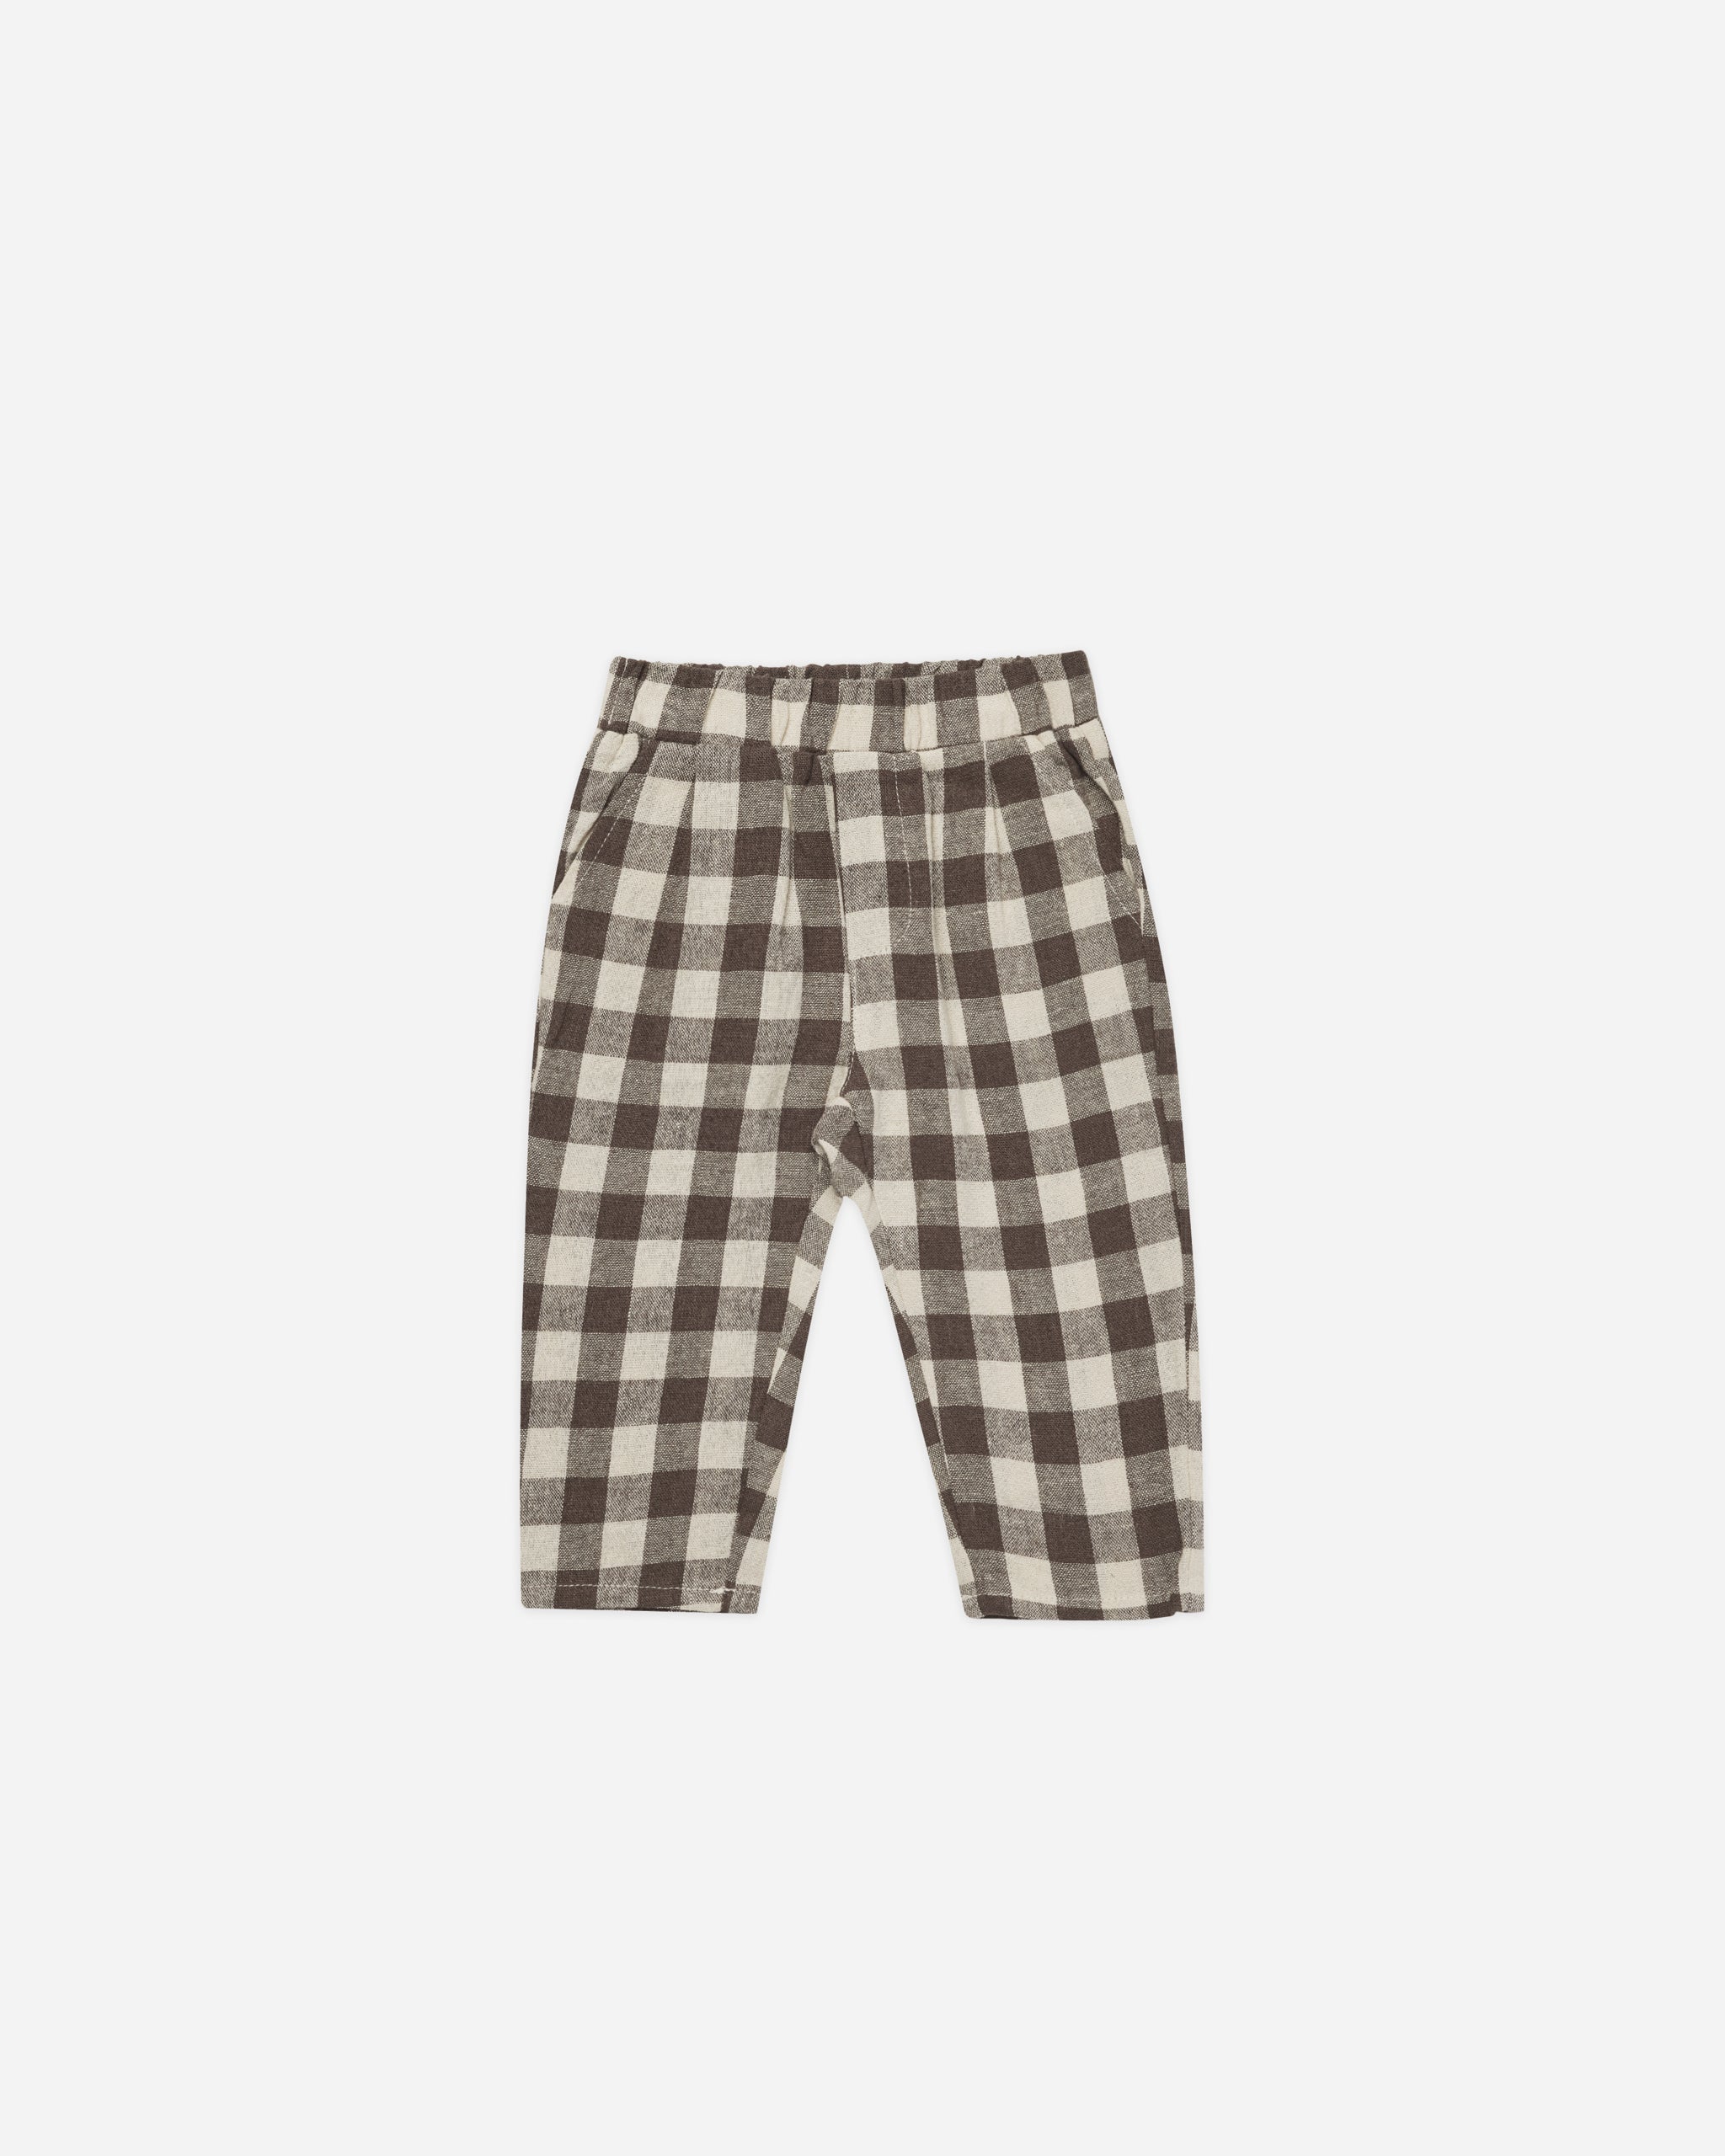 Otis Pant || Charcoal Check - Rylee + Cru | Kids Clothes | Trendy Baby Clothes | Modern Infant Outfits |